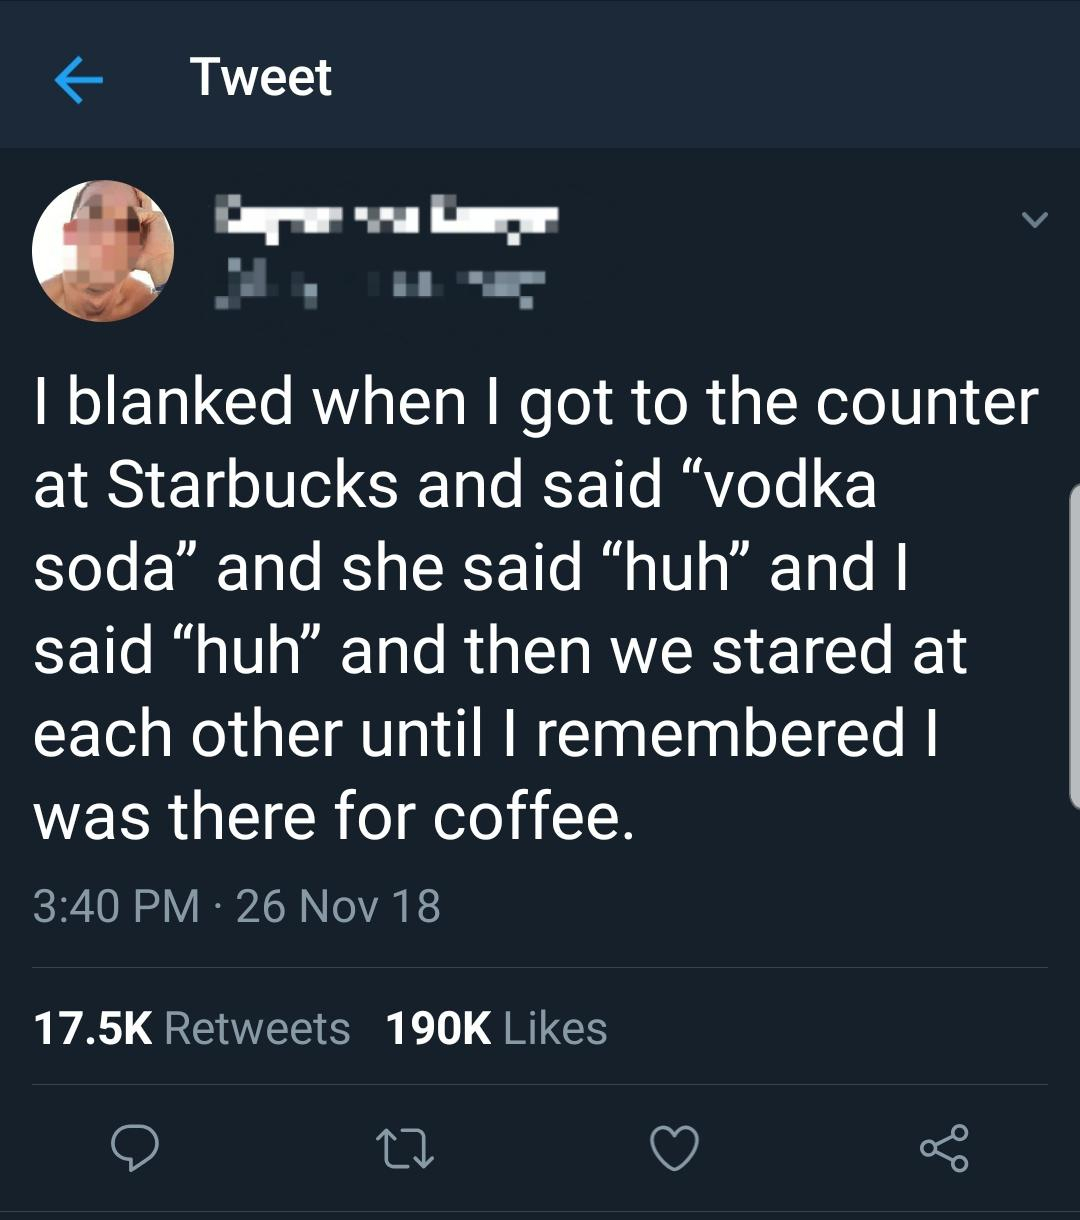 screenshot - Tweet I blanked when I got to the counter at Starbucks and said vodka soda" and she said huh and said "huh and then we stared at each other until I remembered | was there for coffee. 26 Nov 18